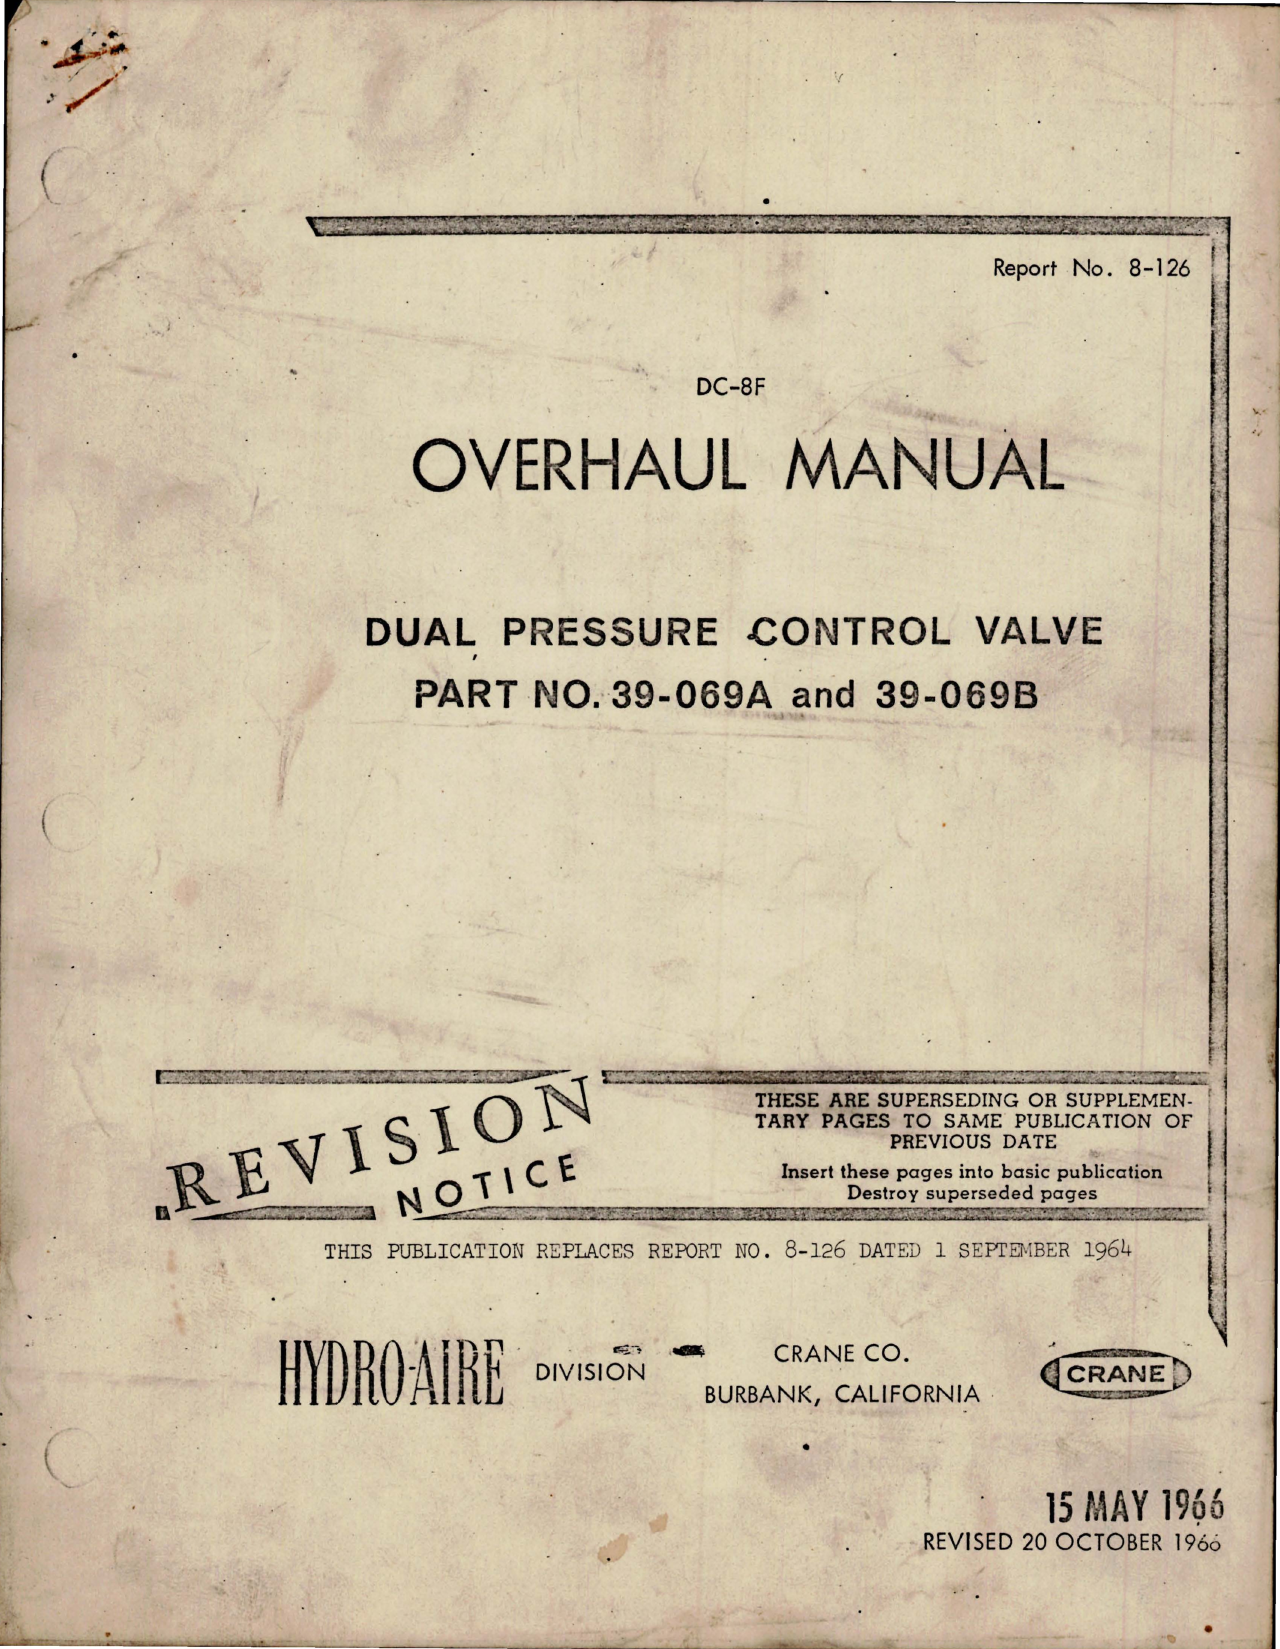 Sample page 1 from AirCorps Library document: Overhaul Manual for Dual Pressure Control Valve - Parts 39-069A and 39-069B 